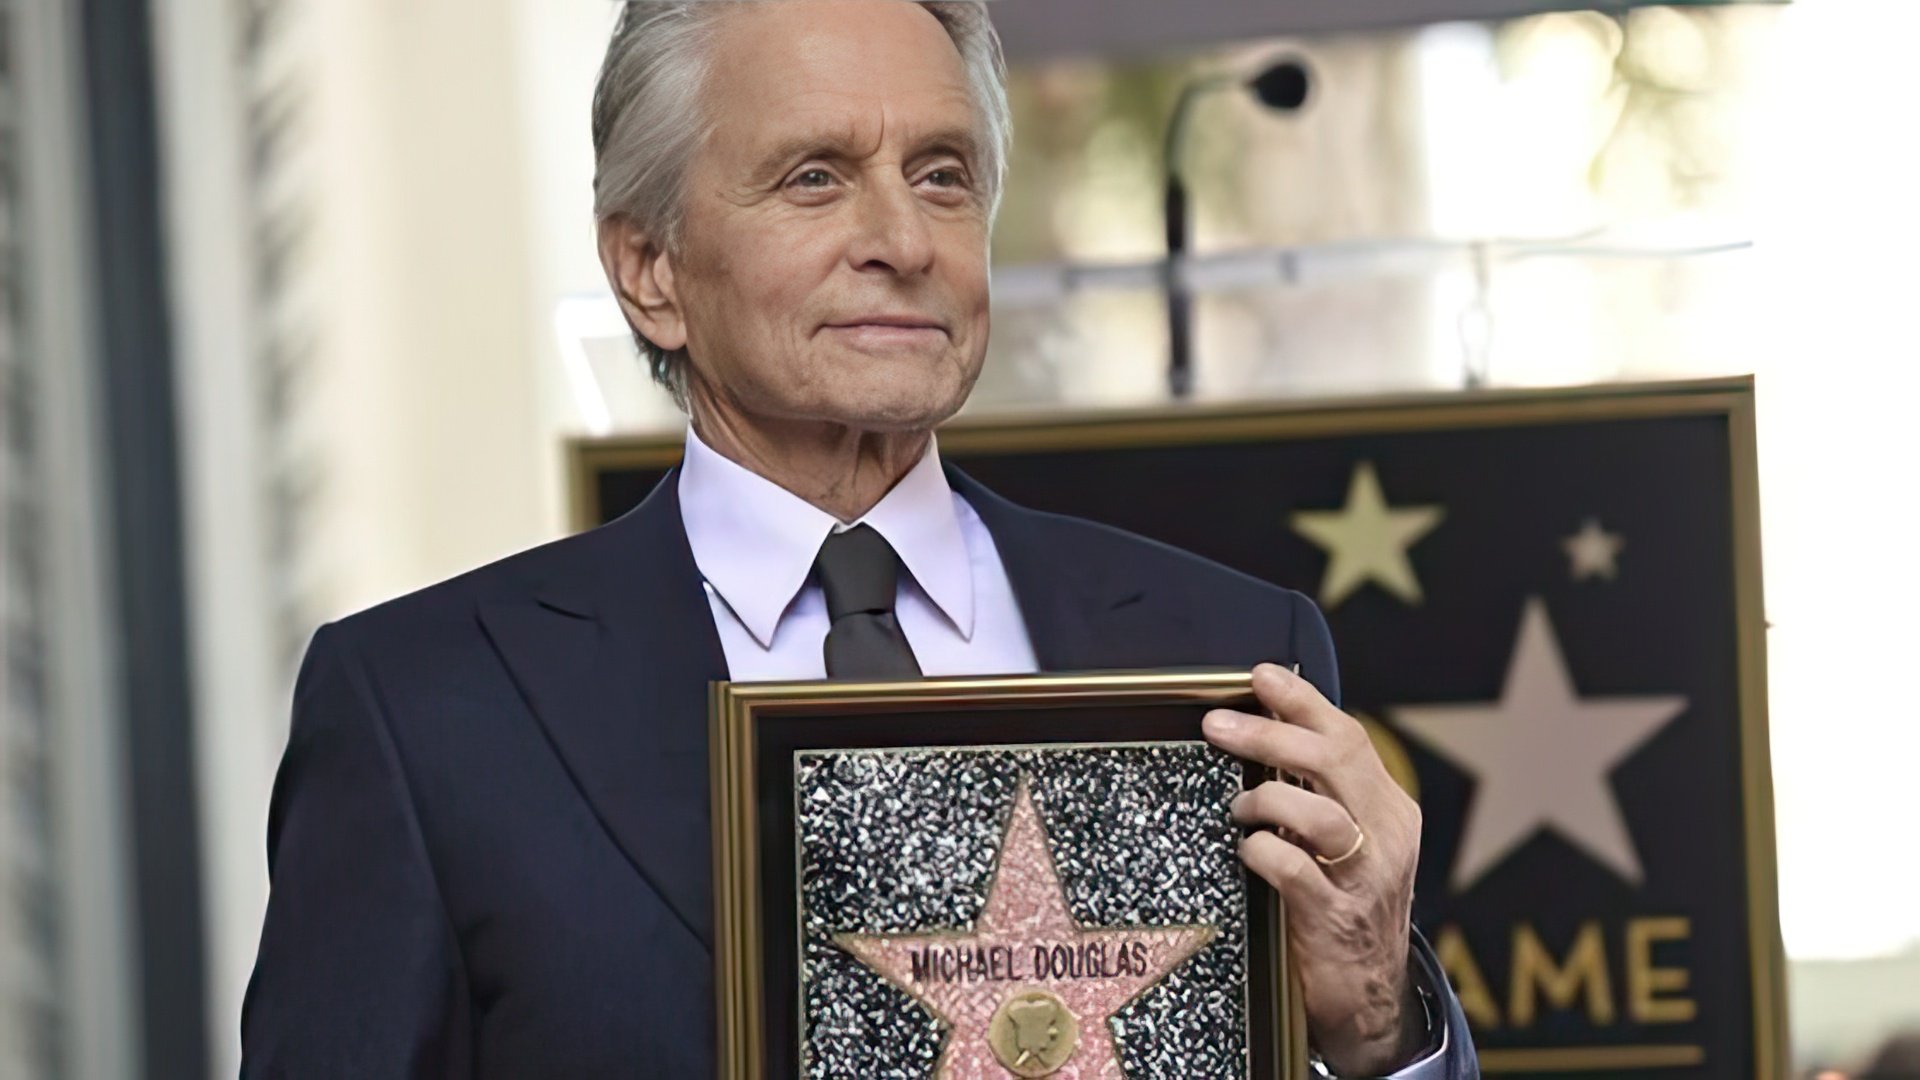 Michael Douglas’s star on the Hollywood Walk of Fame